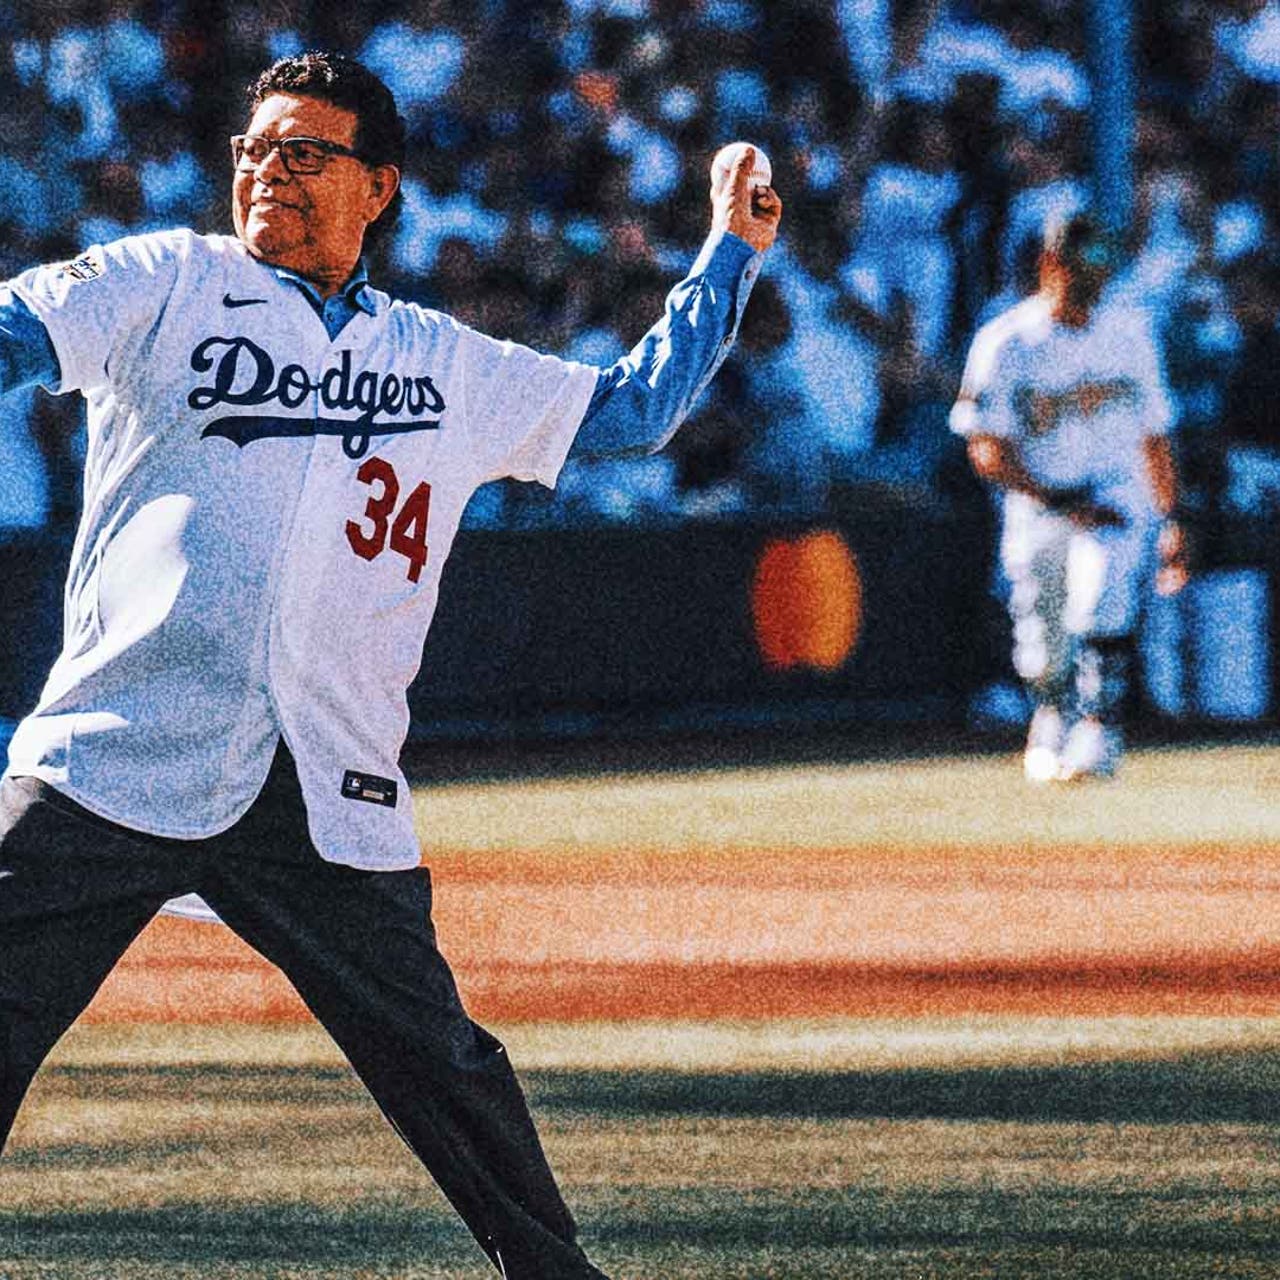 MLB on X: RT @Dodgers: There will never be another 34. Congratulations Fernando  Valenzuela on having your No. 34 retired!  / X